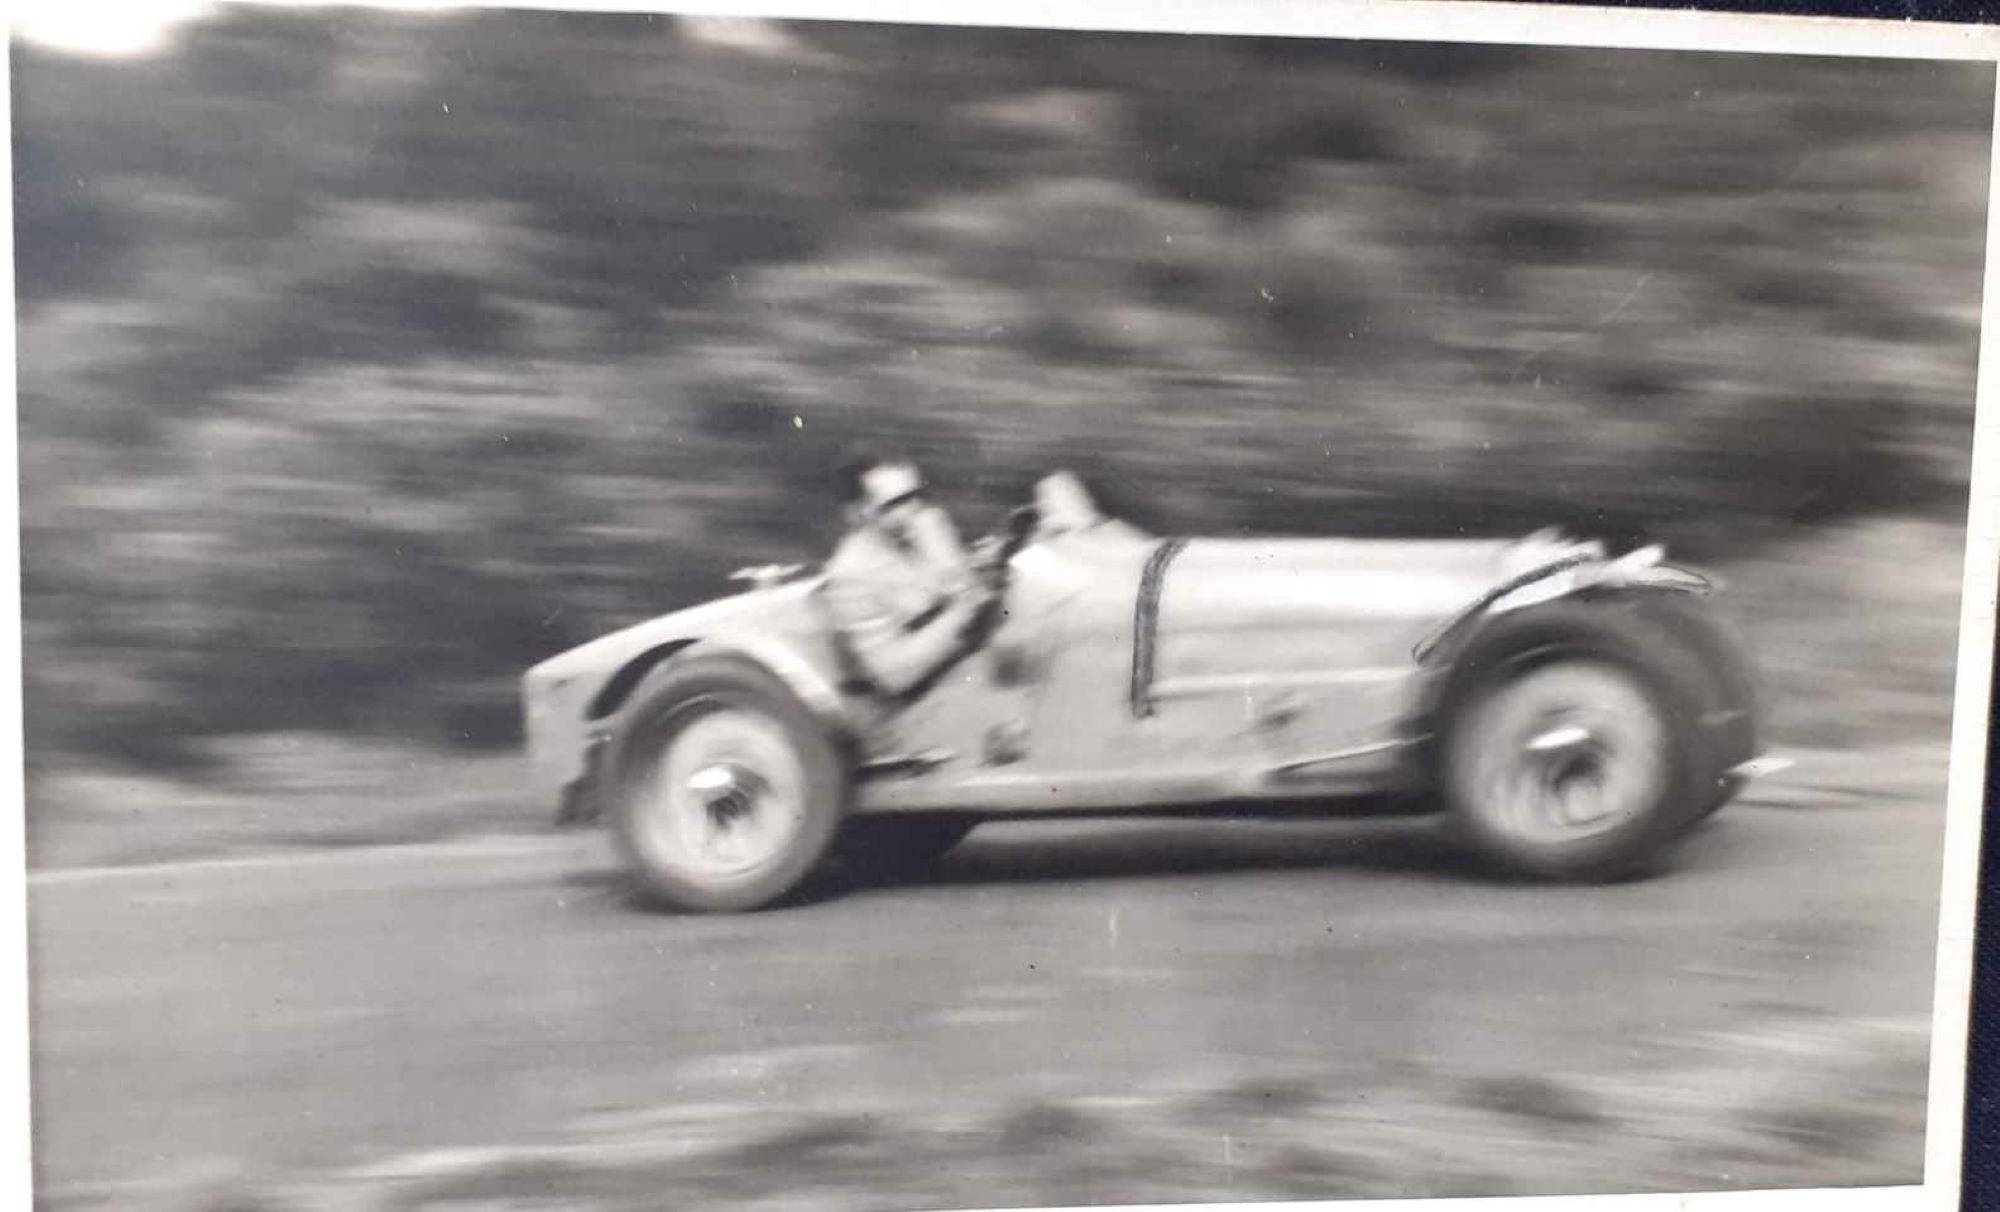 Name:  NSCC 1950 #0116 Bugatti T35 at speed - light colour 1950's - image Graeme Wells arch Anthony Wel.jpg
Views: 219
Size:  158.1 KB